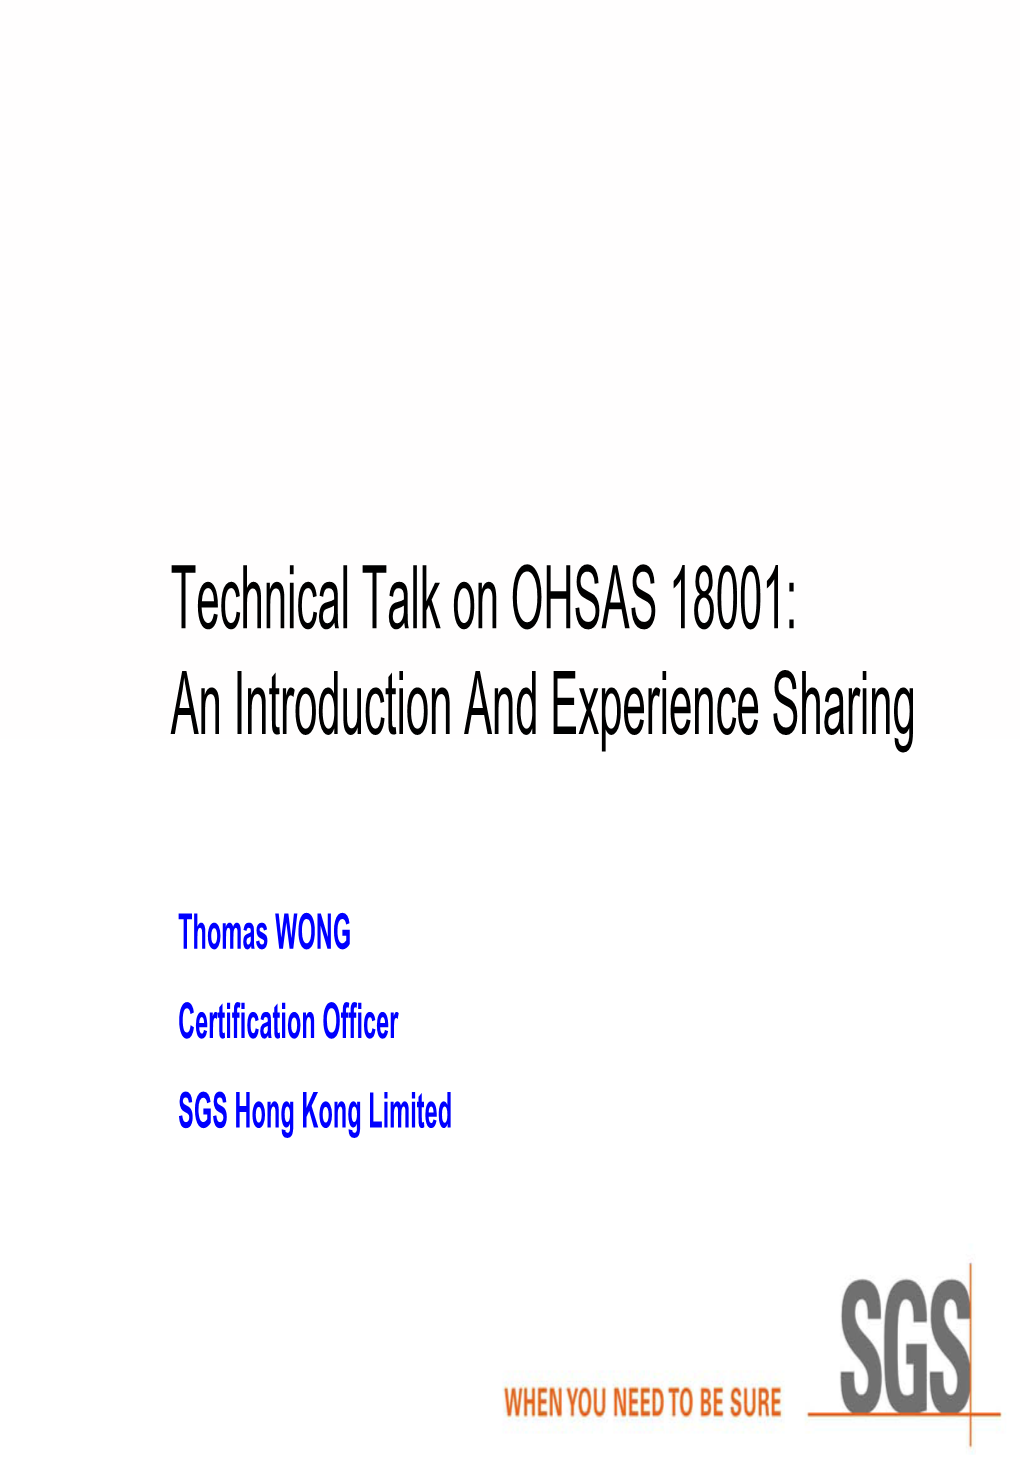 OHSAS 18001:1999 Standard and Its Requirements